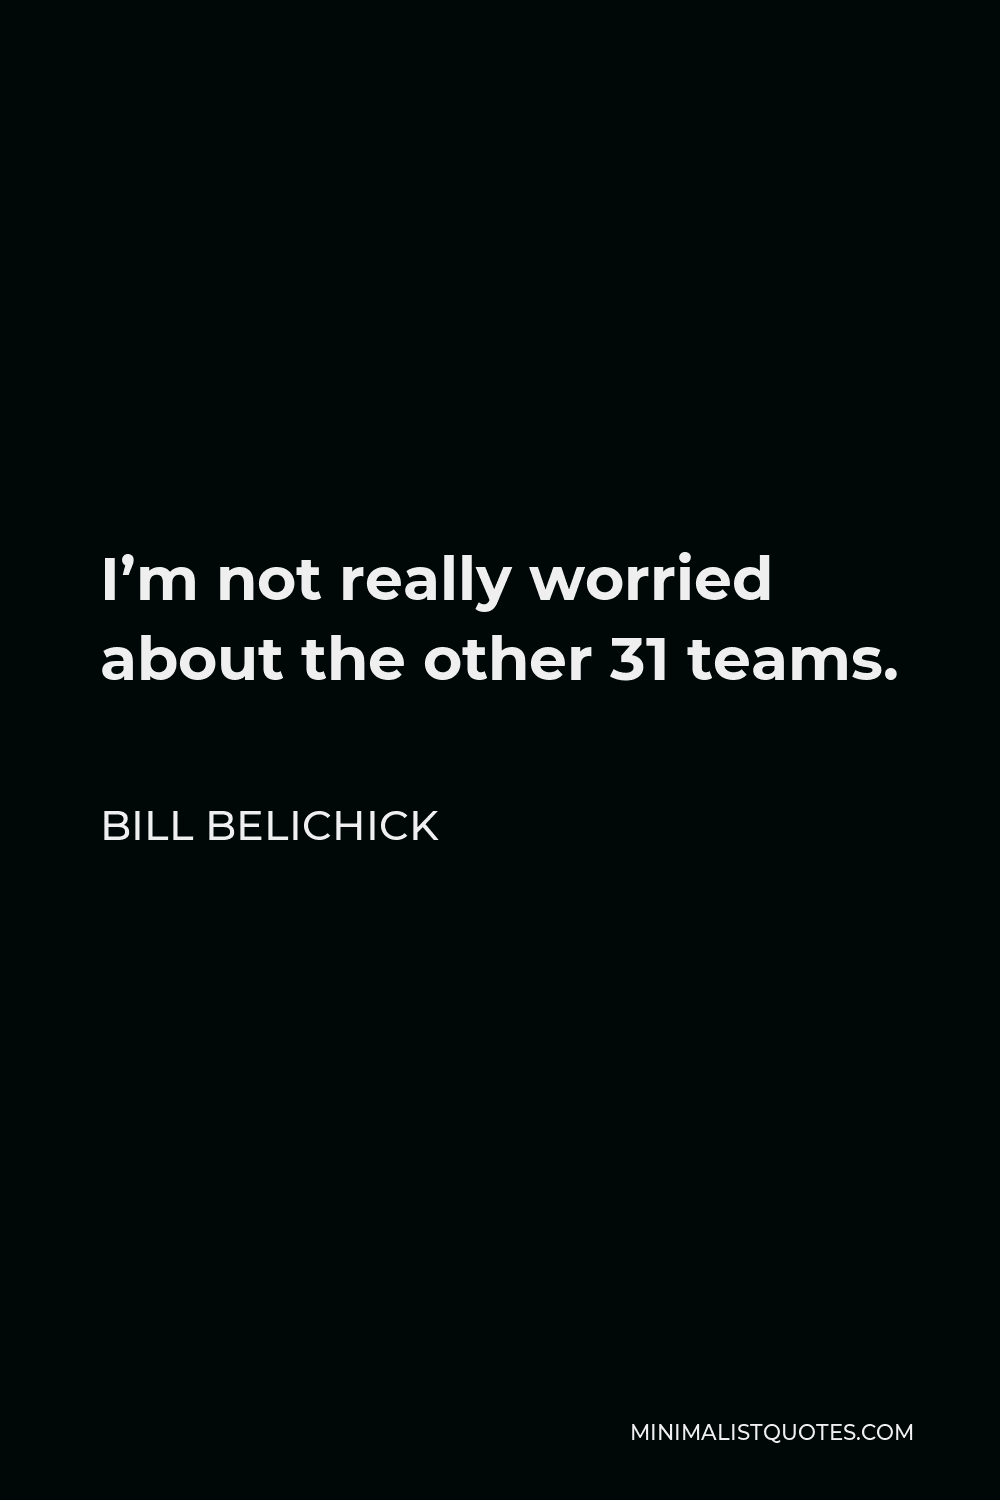 Bill Belichick Quote - I’m not really worried about the other 31 teams.